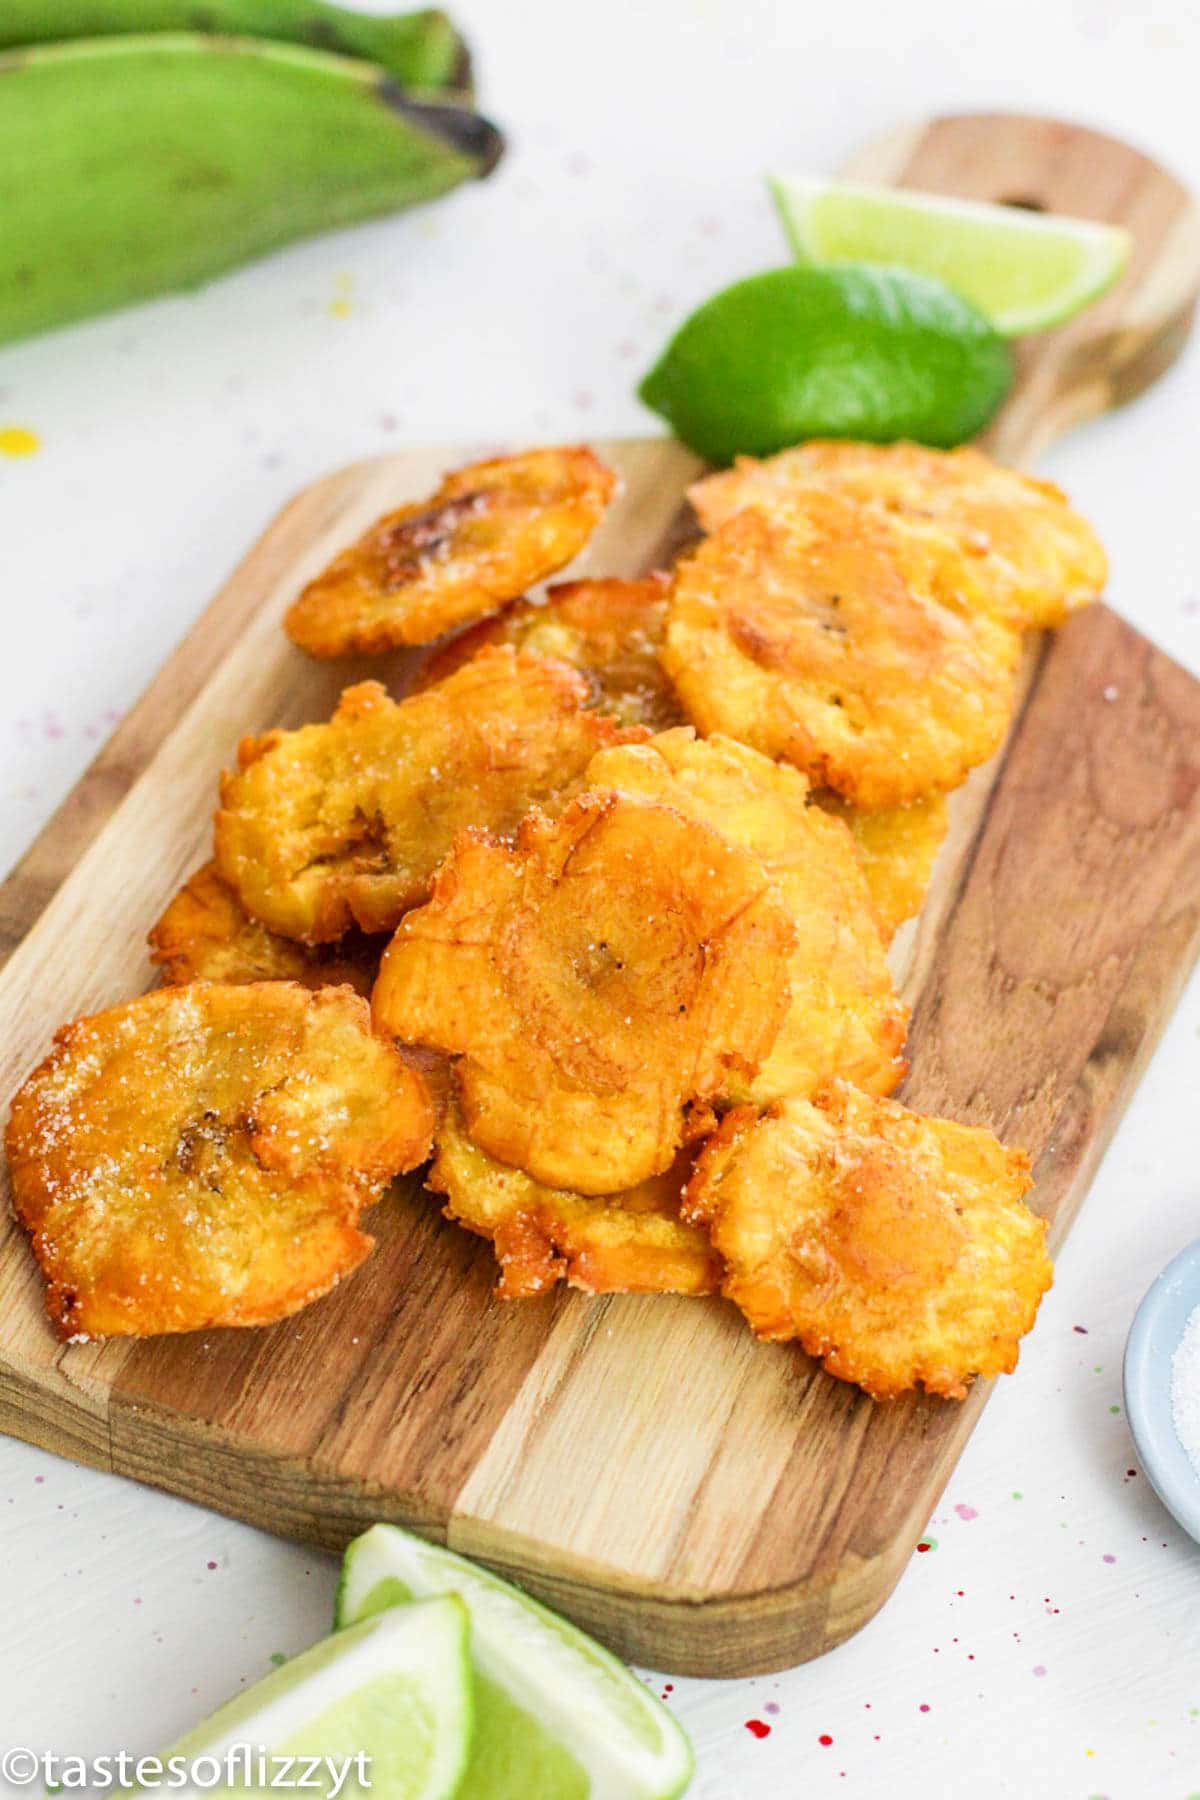 Fried Plantains Recipe How To Make Tostones Double Fried Plantains